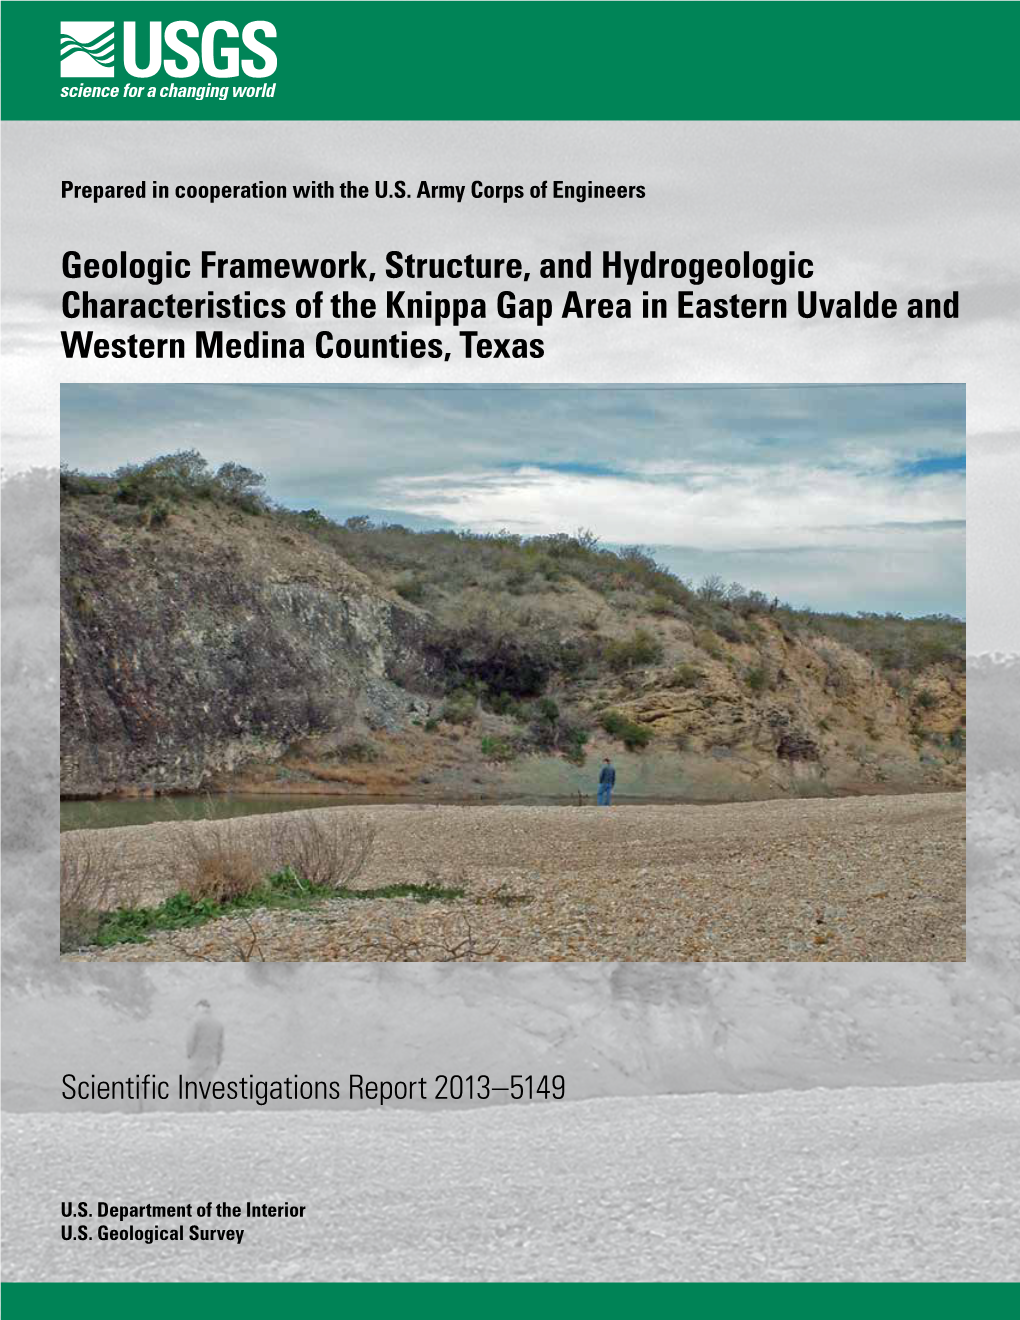 Geologic Framework, Structure, and Hydrogeologic Characteristics of the Knippa Gap Area in Eastern Uvalde and Western Medina Counties, Texas